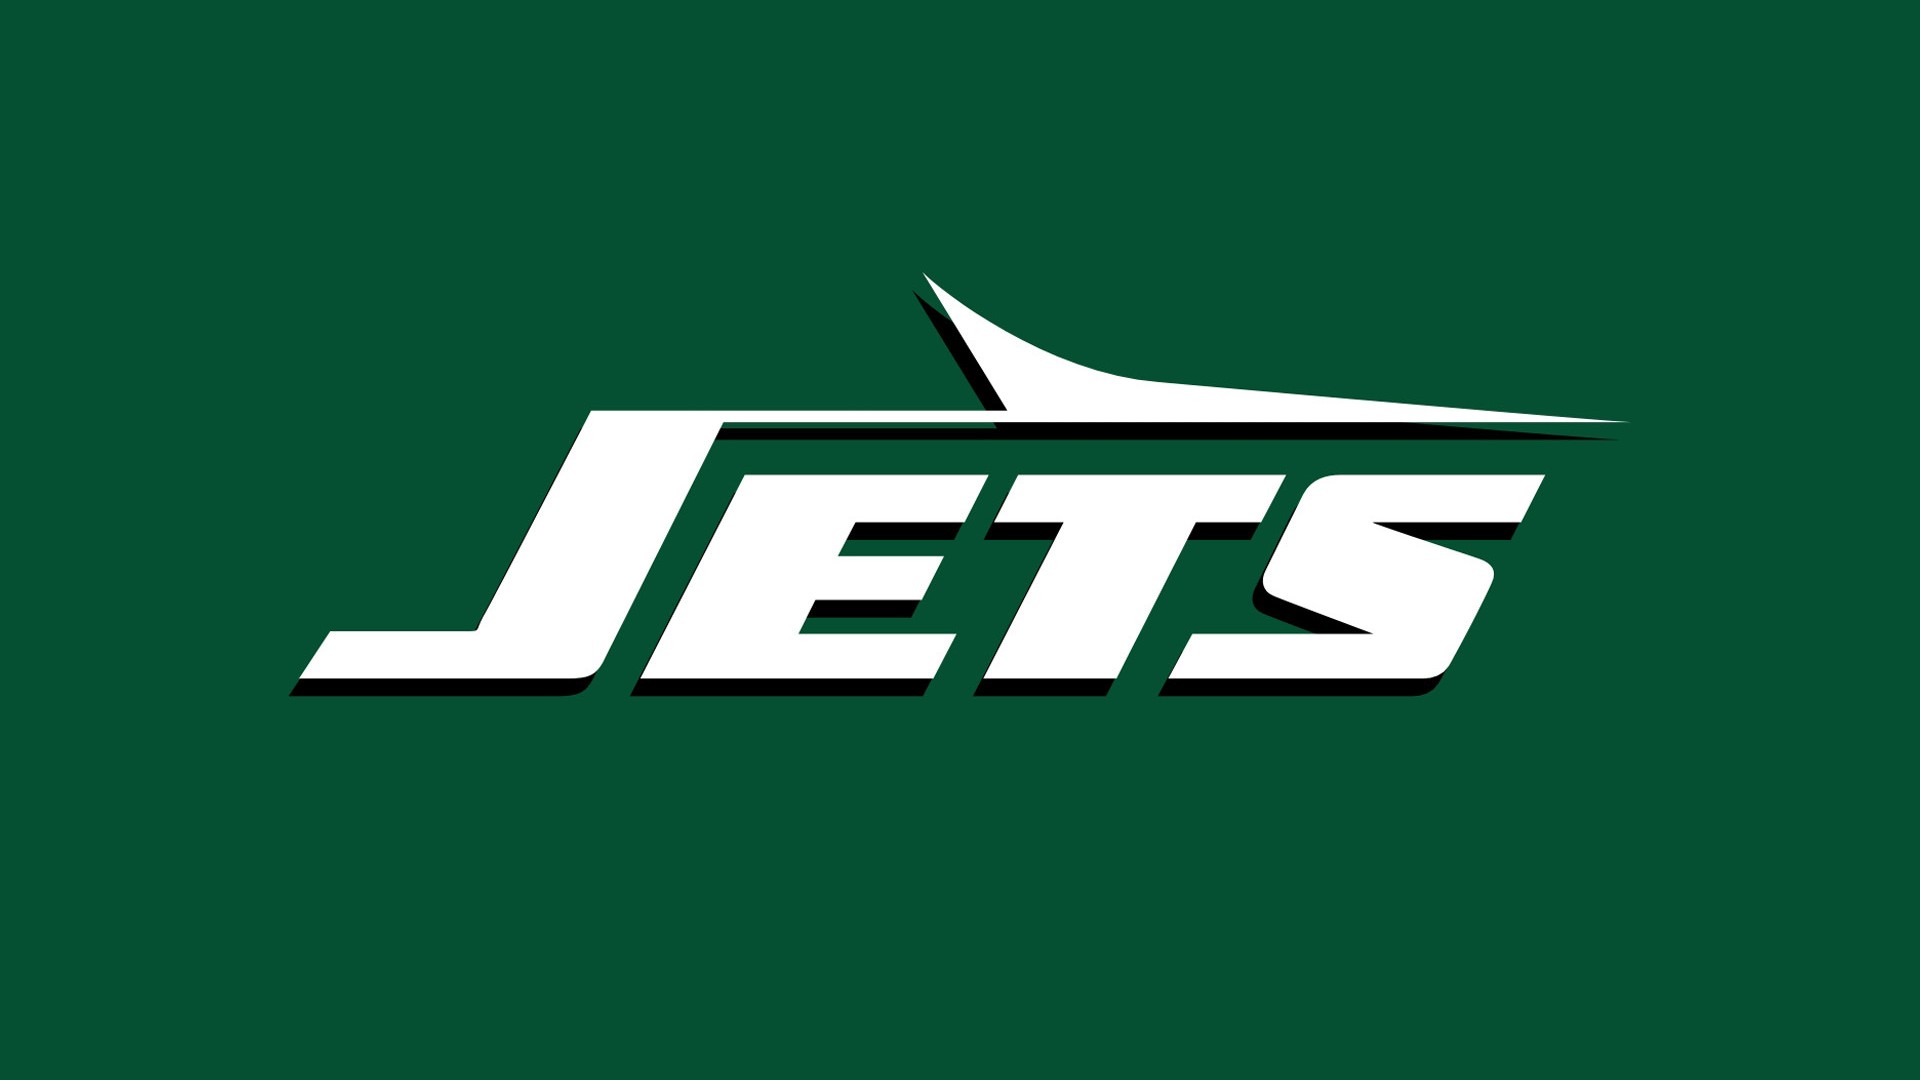 Wallpaper Desktop New York Jets HD With Resolution 1920X1080 pixel. You can make this wallpaper for your Mac or Windows Desktop Background, iPhone, Android or Tablet and another Smartphone device for free